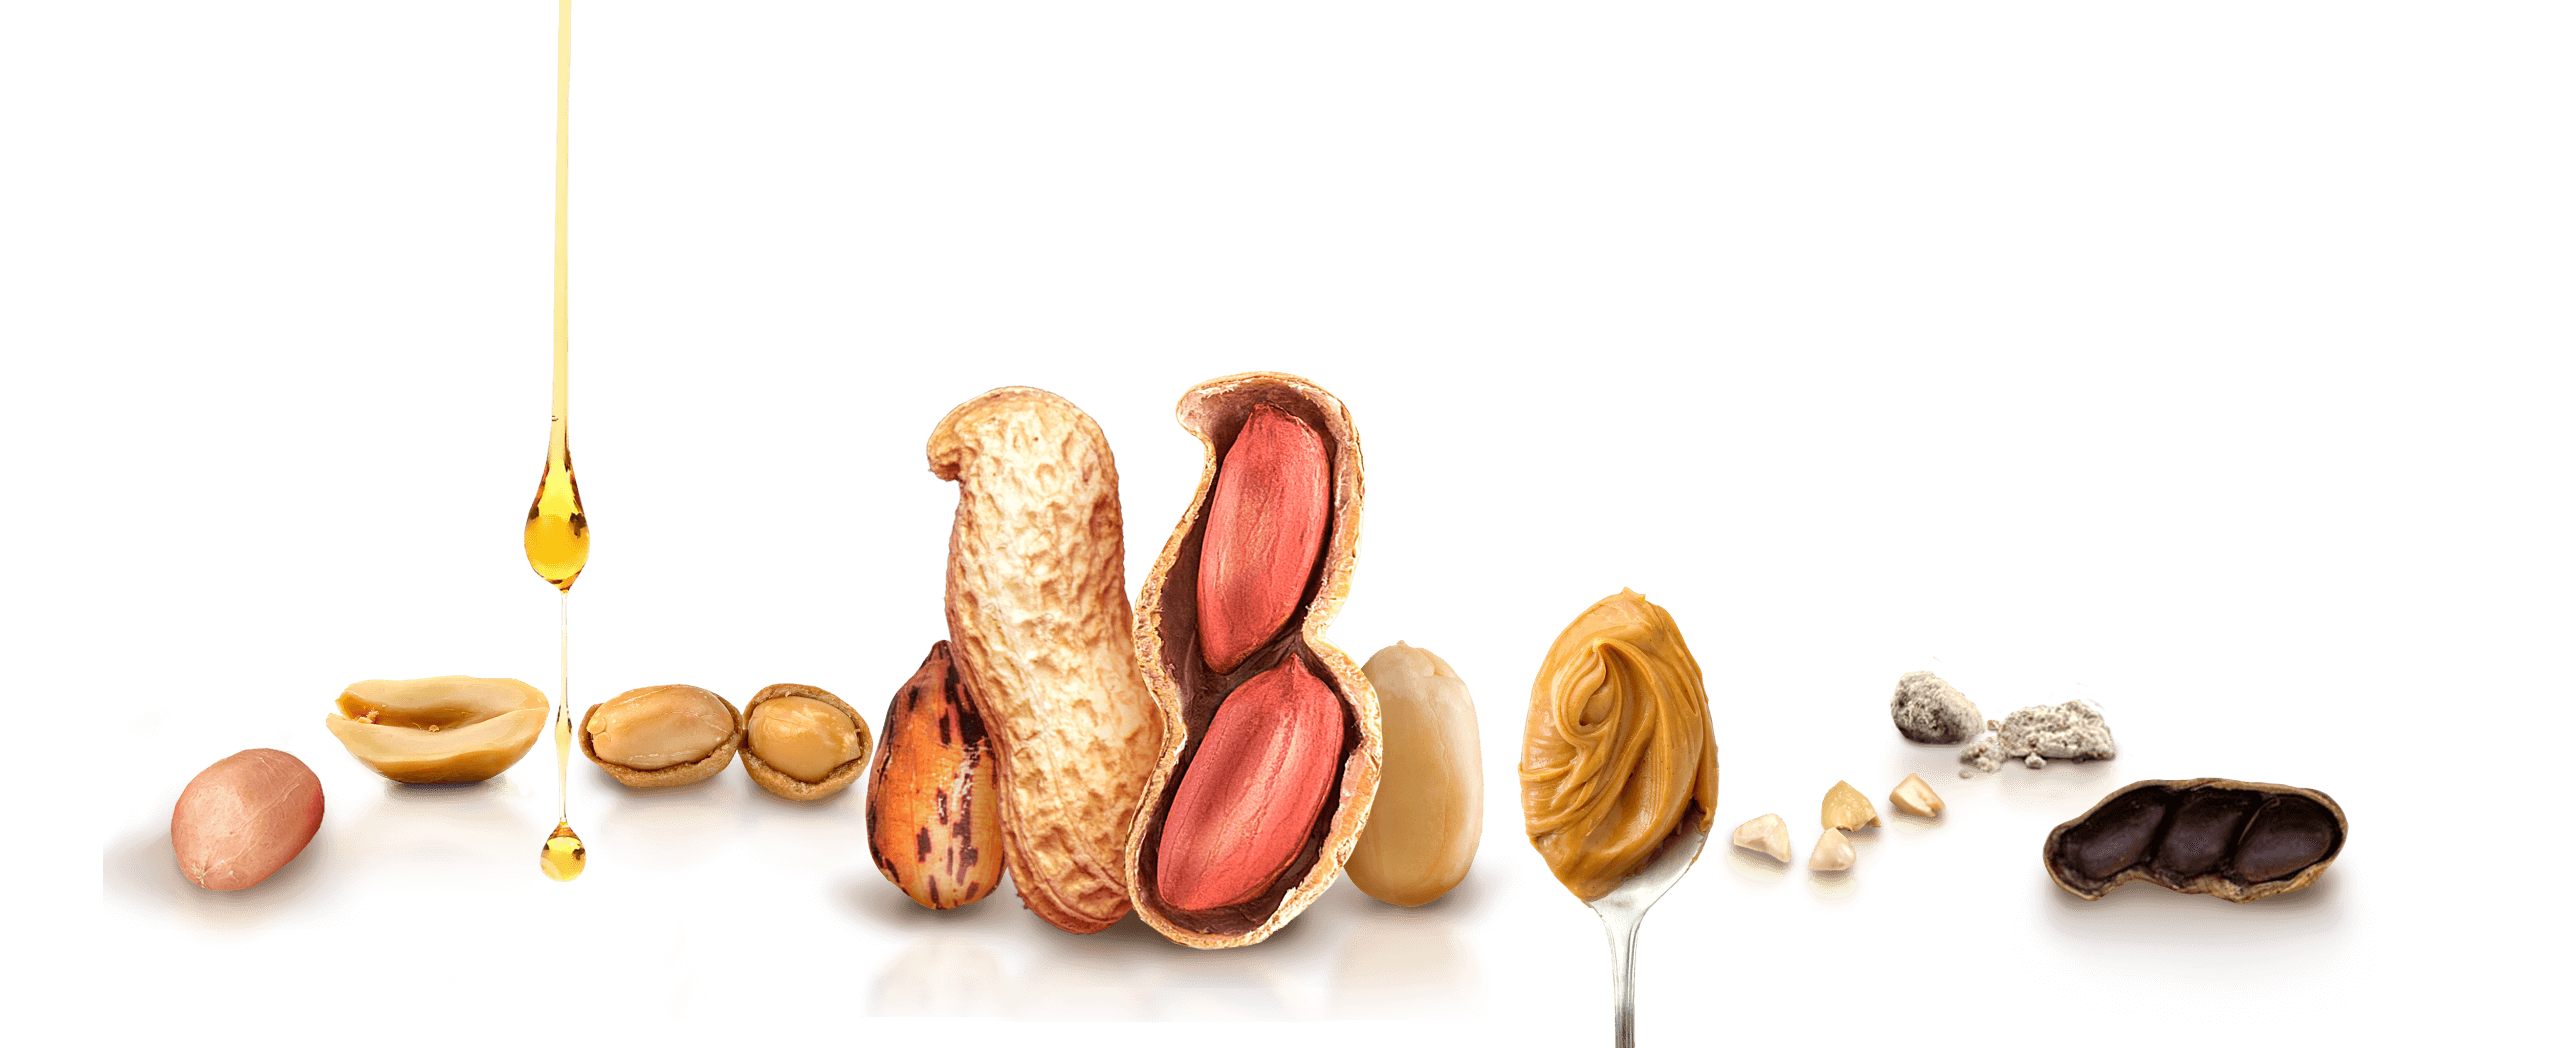 Every peanut product you can dream of